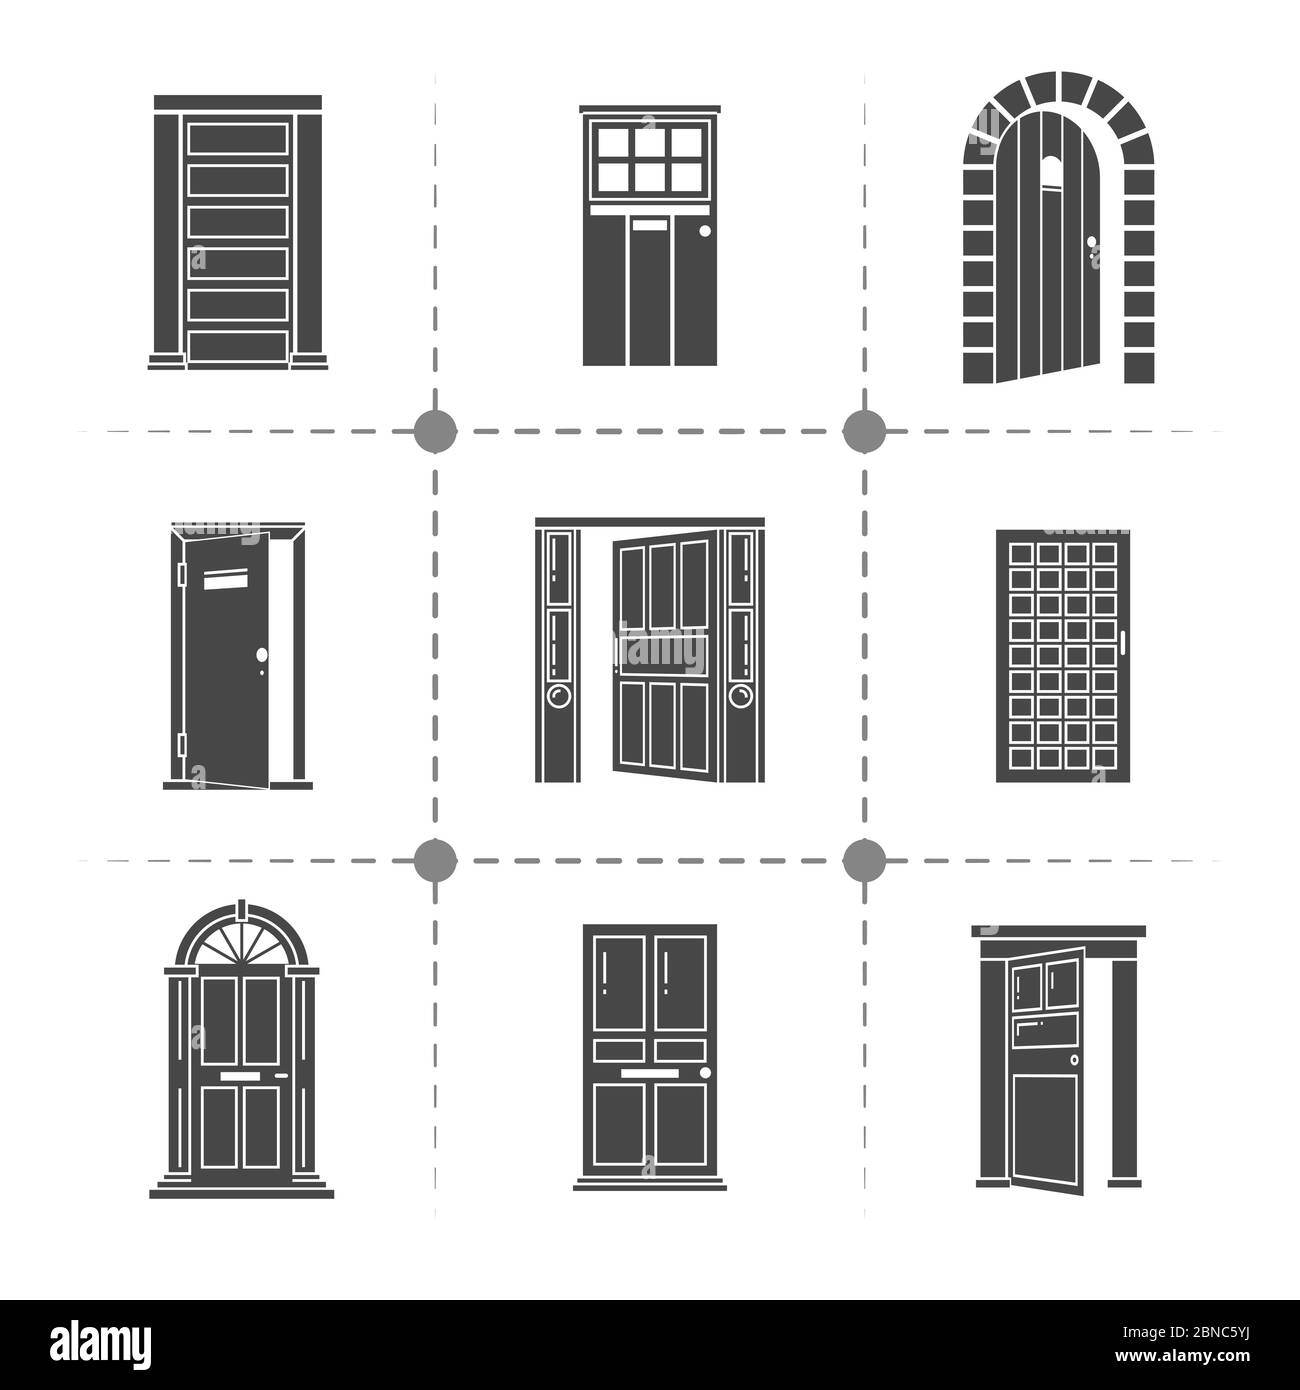 Open and closed door silhouettes vector icons set isolated on white illustration Stock Vector